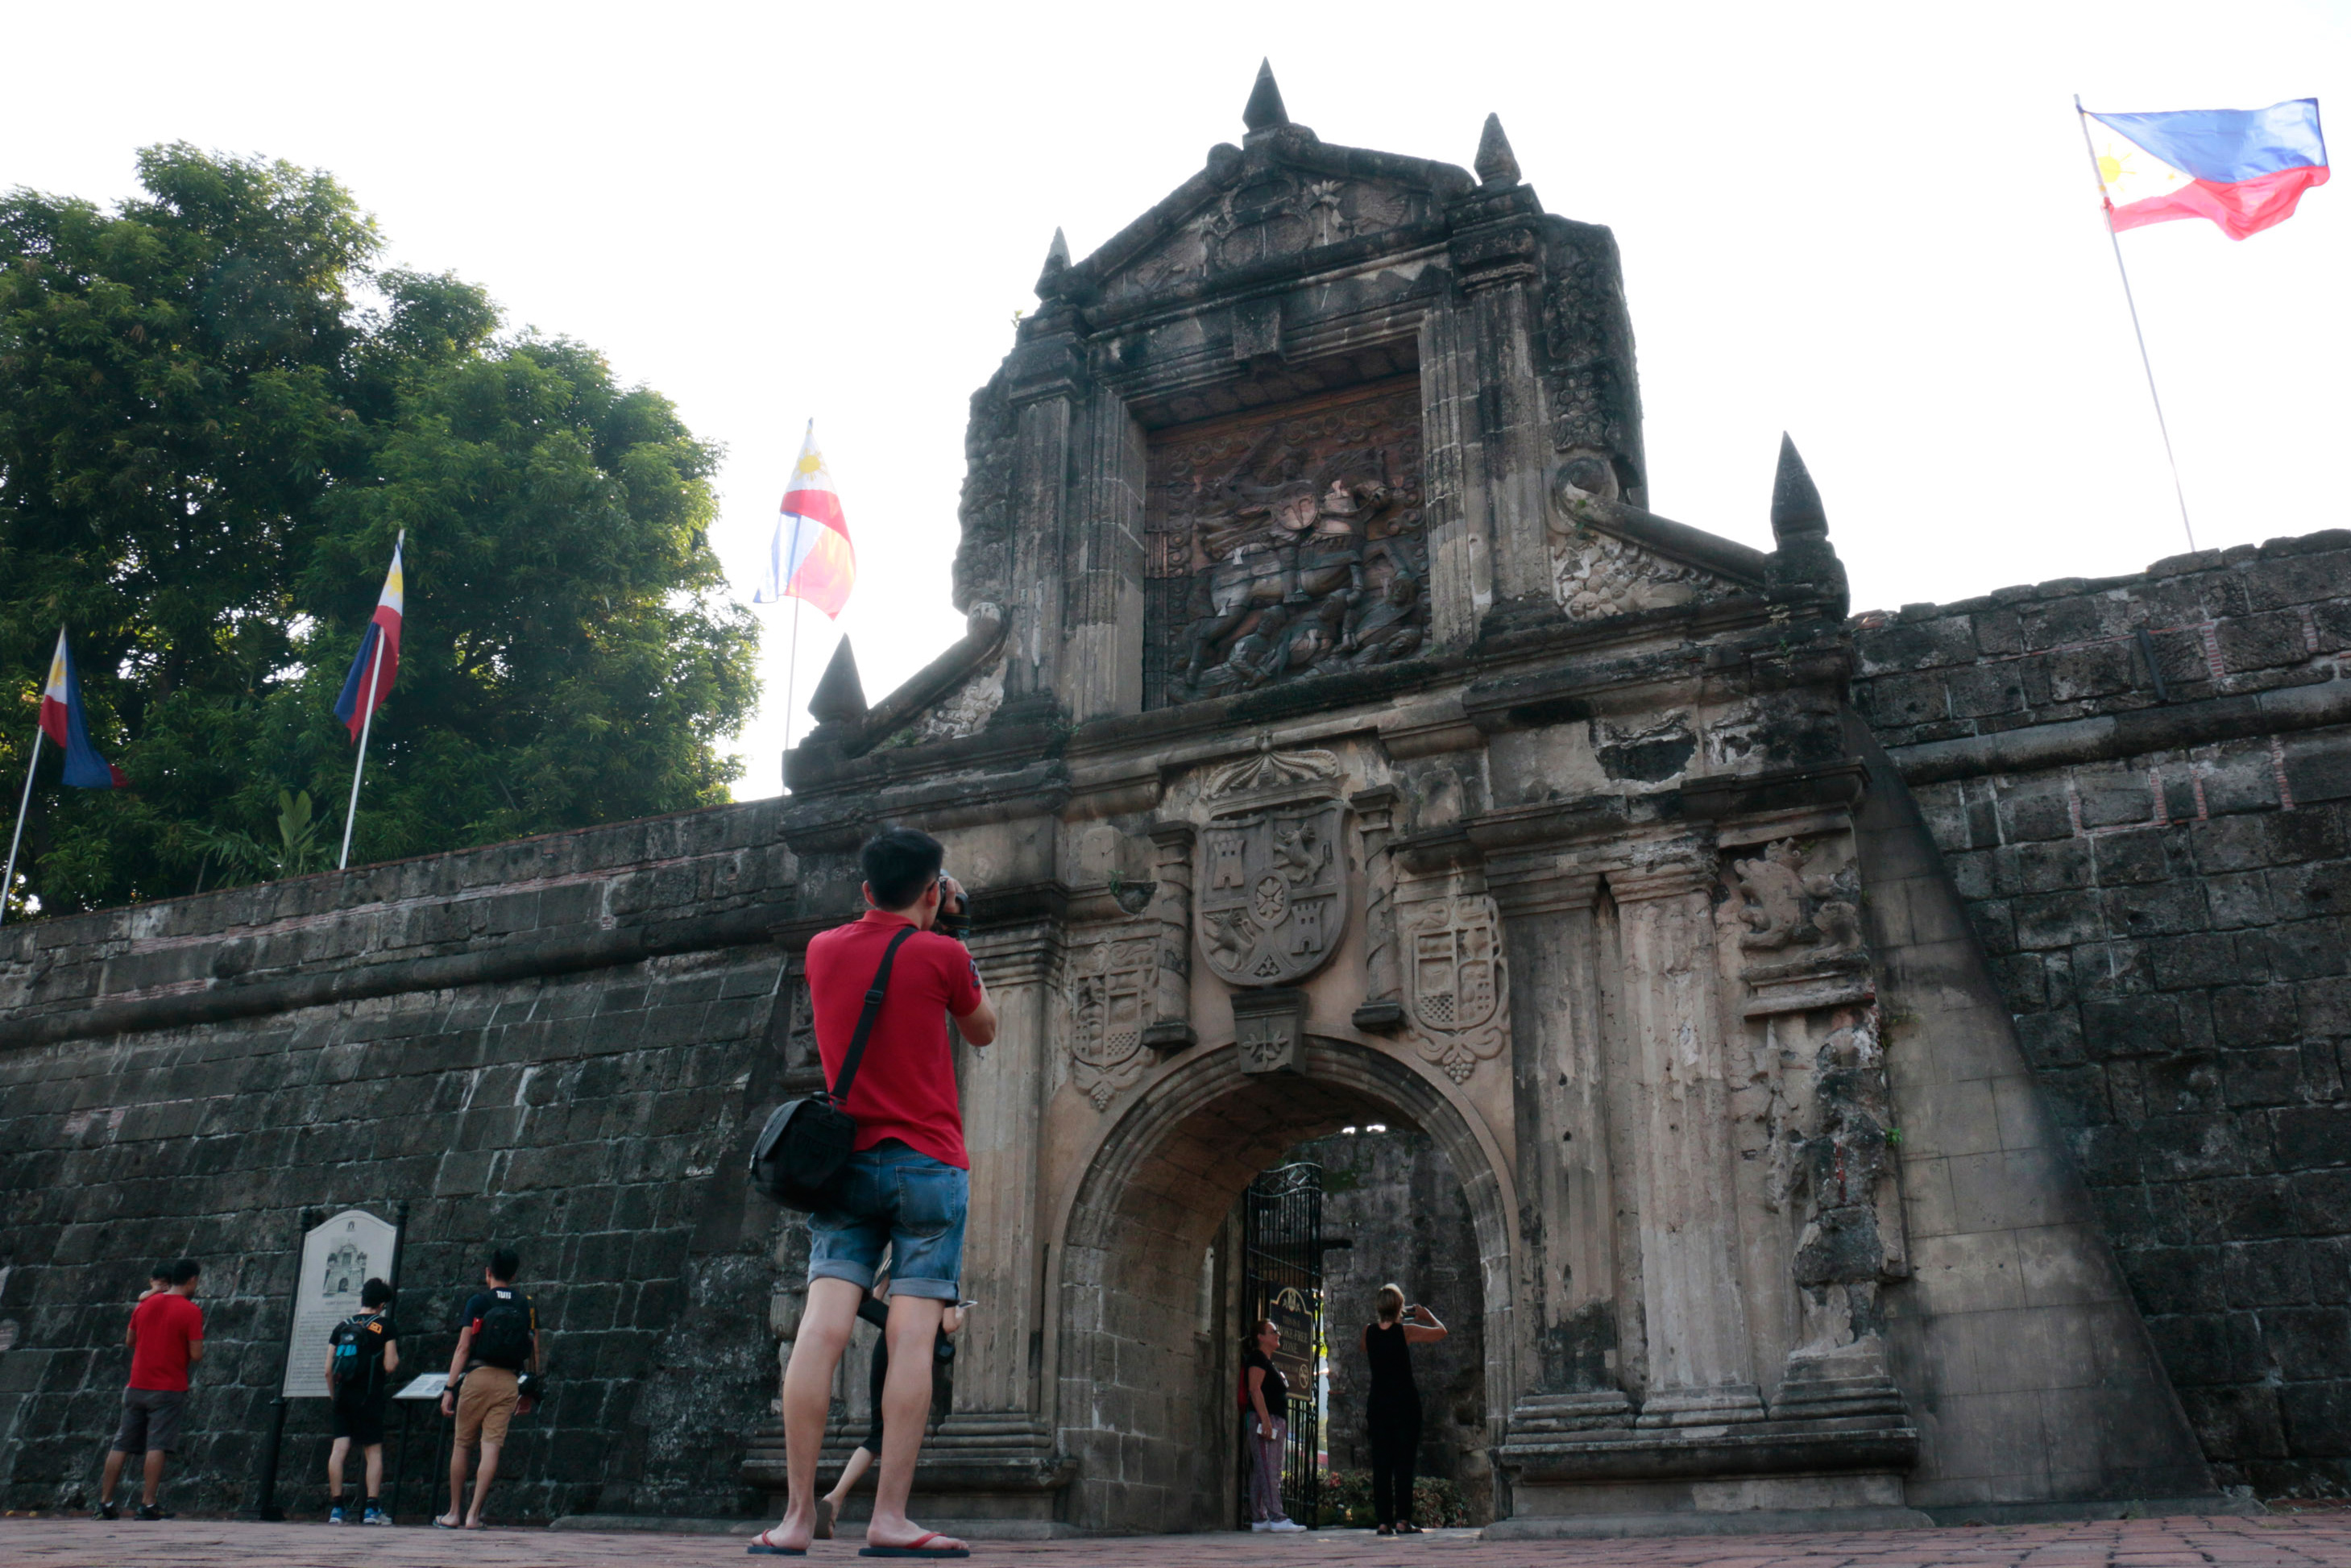 A tourist takes a photo at Fort Santiago in Manila on June 16, 2017. Philippines has fired one of the world's top advertising firms in a row over alleged plagiarism, adding more misery to its tourism industry already reeling from a war with Islamist militants and a deadly crackdown on drugs. The tourism department on June 16 cancelled its contract with McCann Worldgroup Philippines and demanded an apology, after deeming its just-launched promotion for the Southeast Asian nation was too similar to a 2014 South African campaign. / AFP PHOTO / JOSEPH AGCAOILI